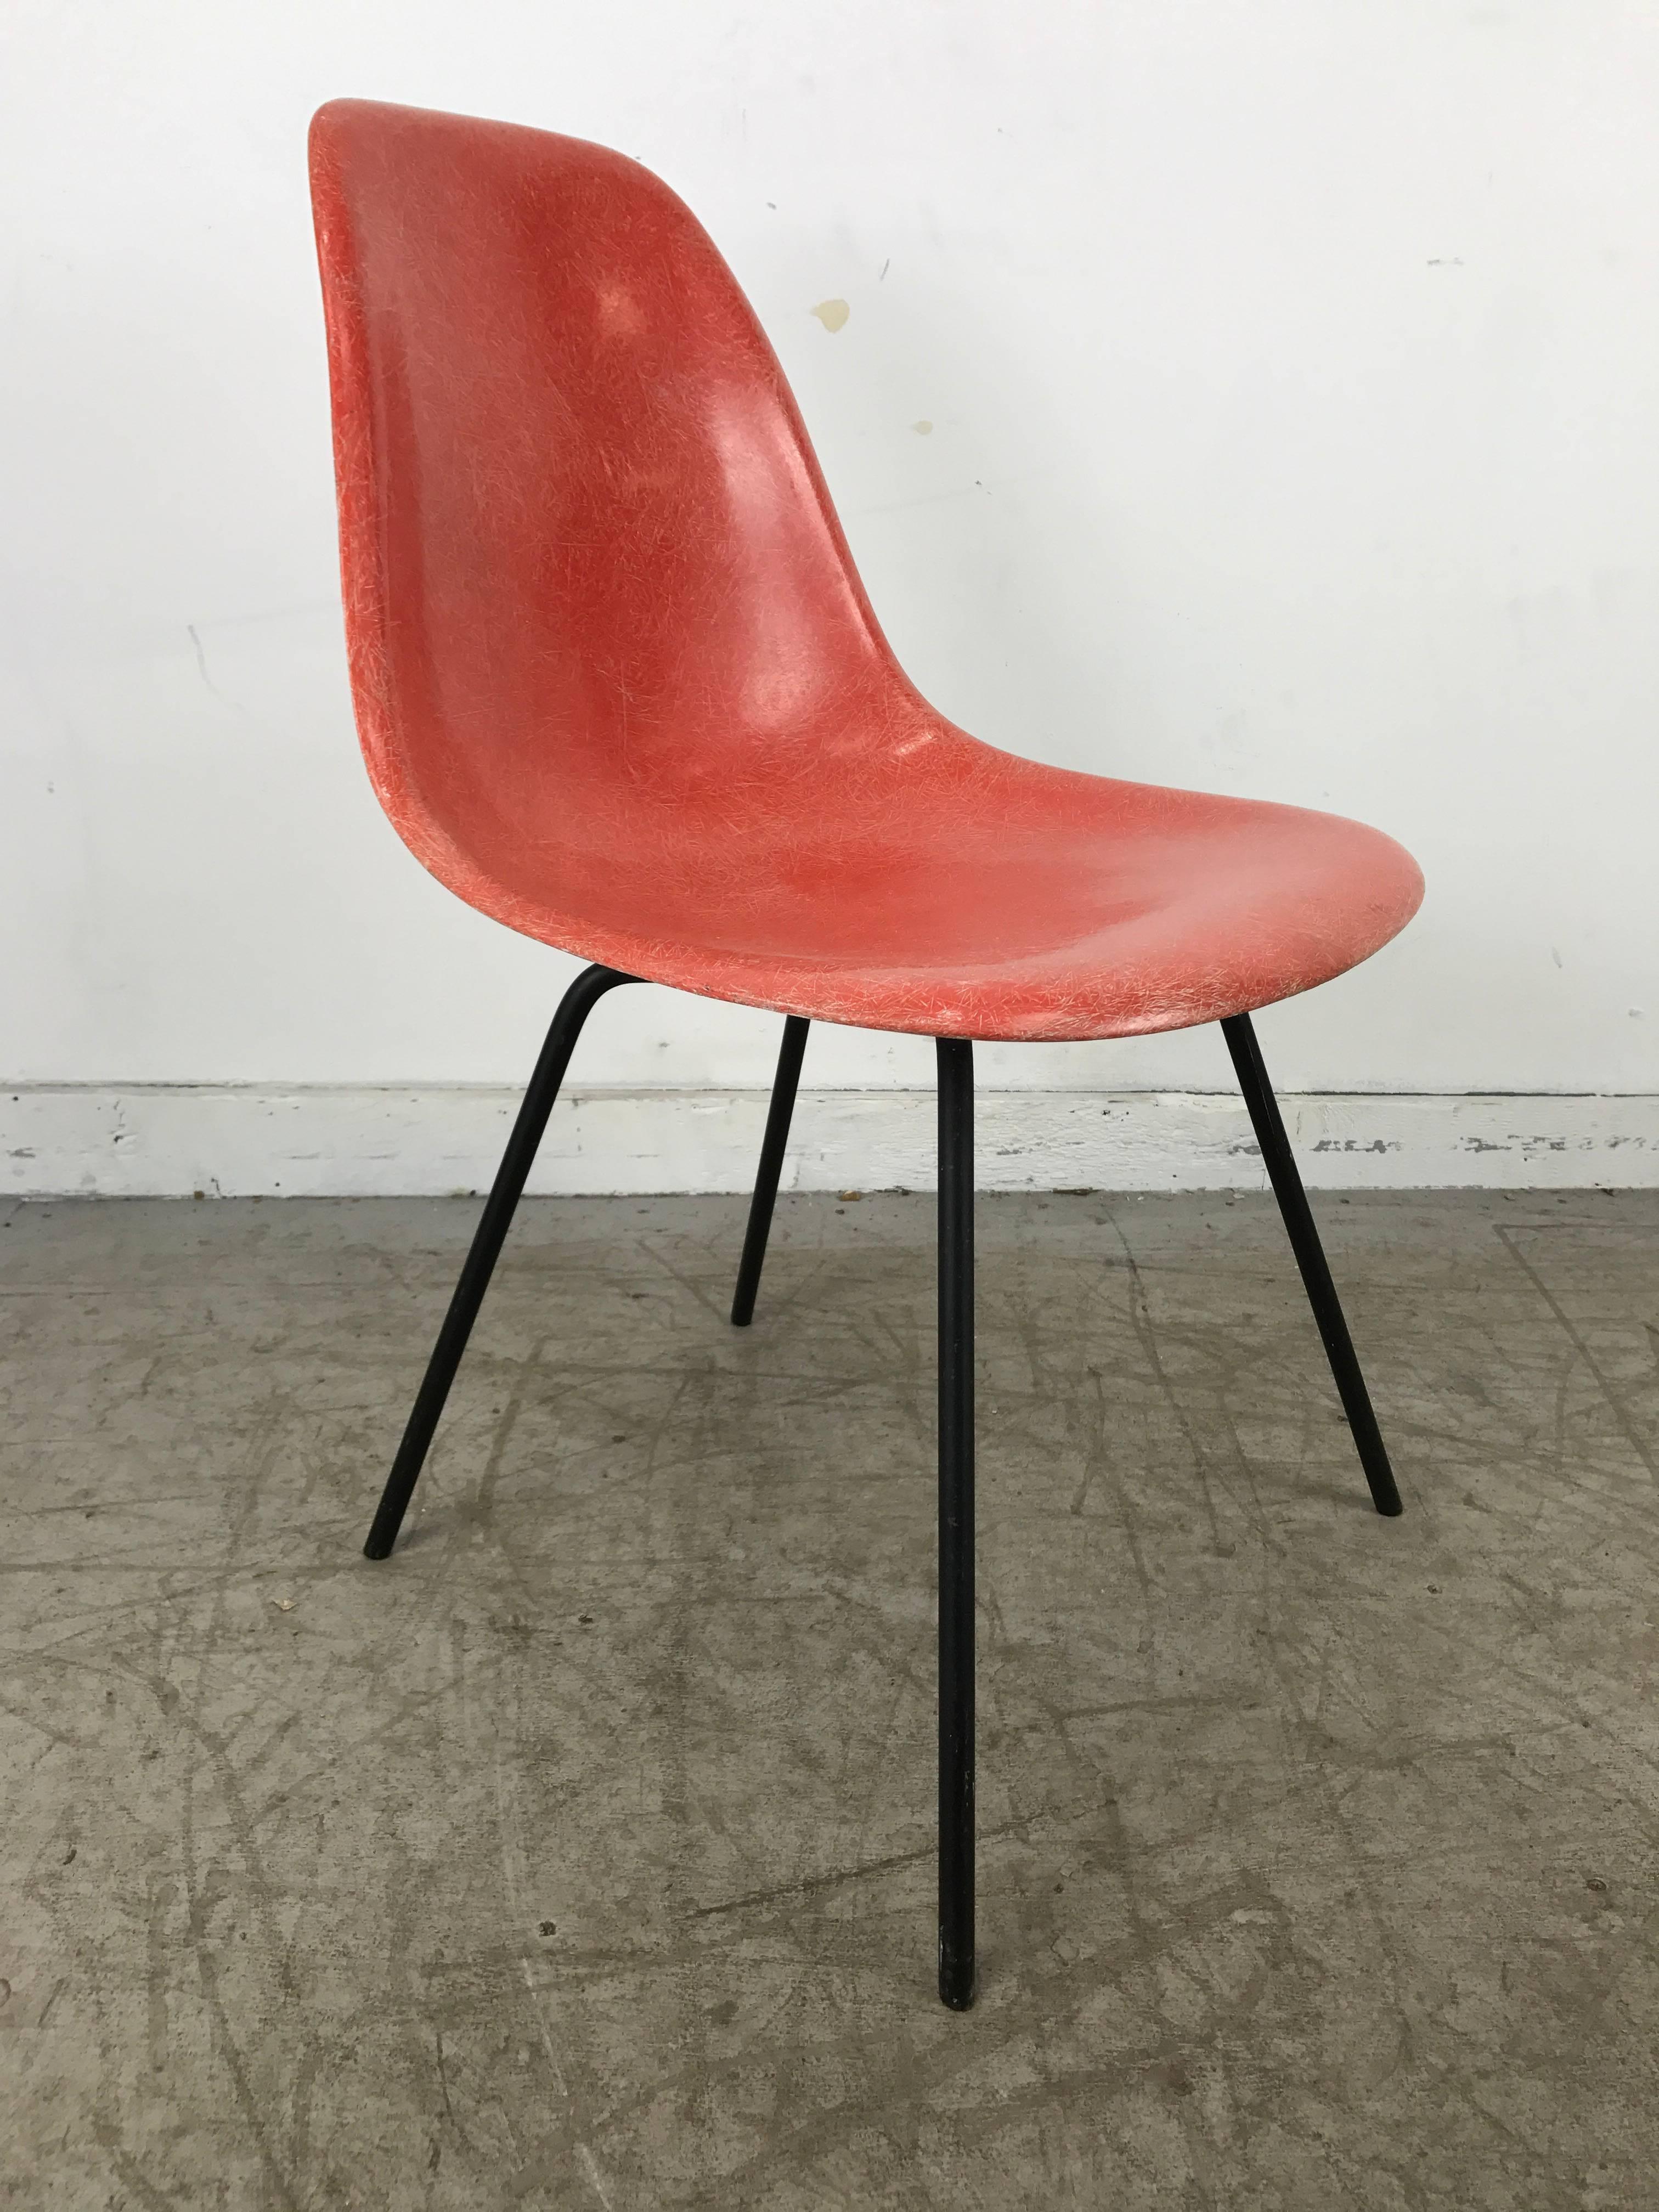 Classic fiberglass side shell chair (scoop) designed by Charles and Ray Eames, early production featuring unusual salmon color shell exposed fibers and early 